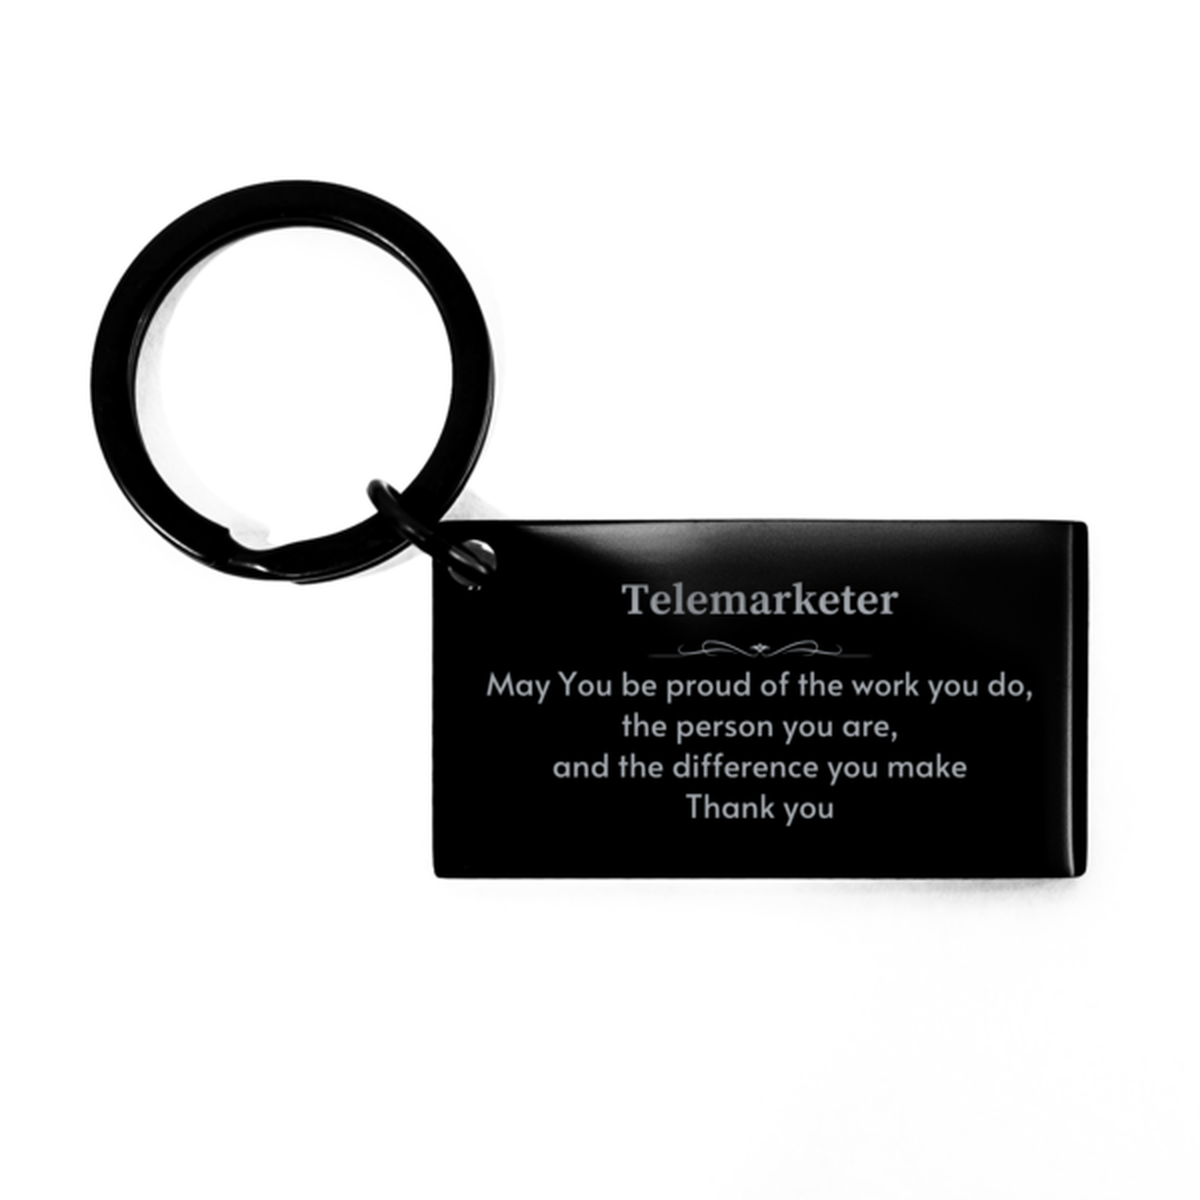 Heartwarming Keychain Retirement Coworkers Gifts for Telemarketer, Writer May You be proud of the work you do, the person you are Gifts for Boss Men Women Friends